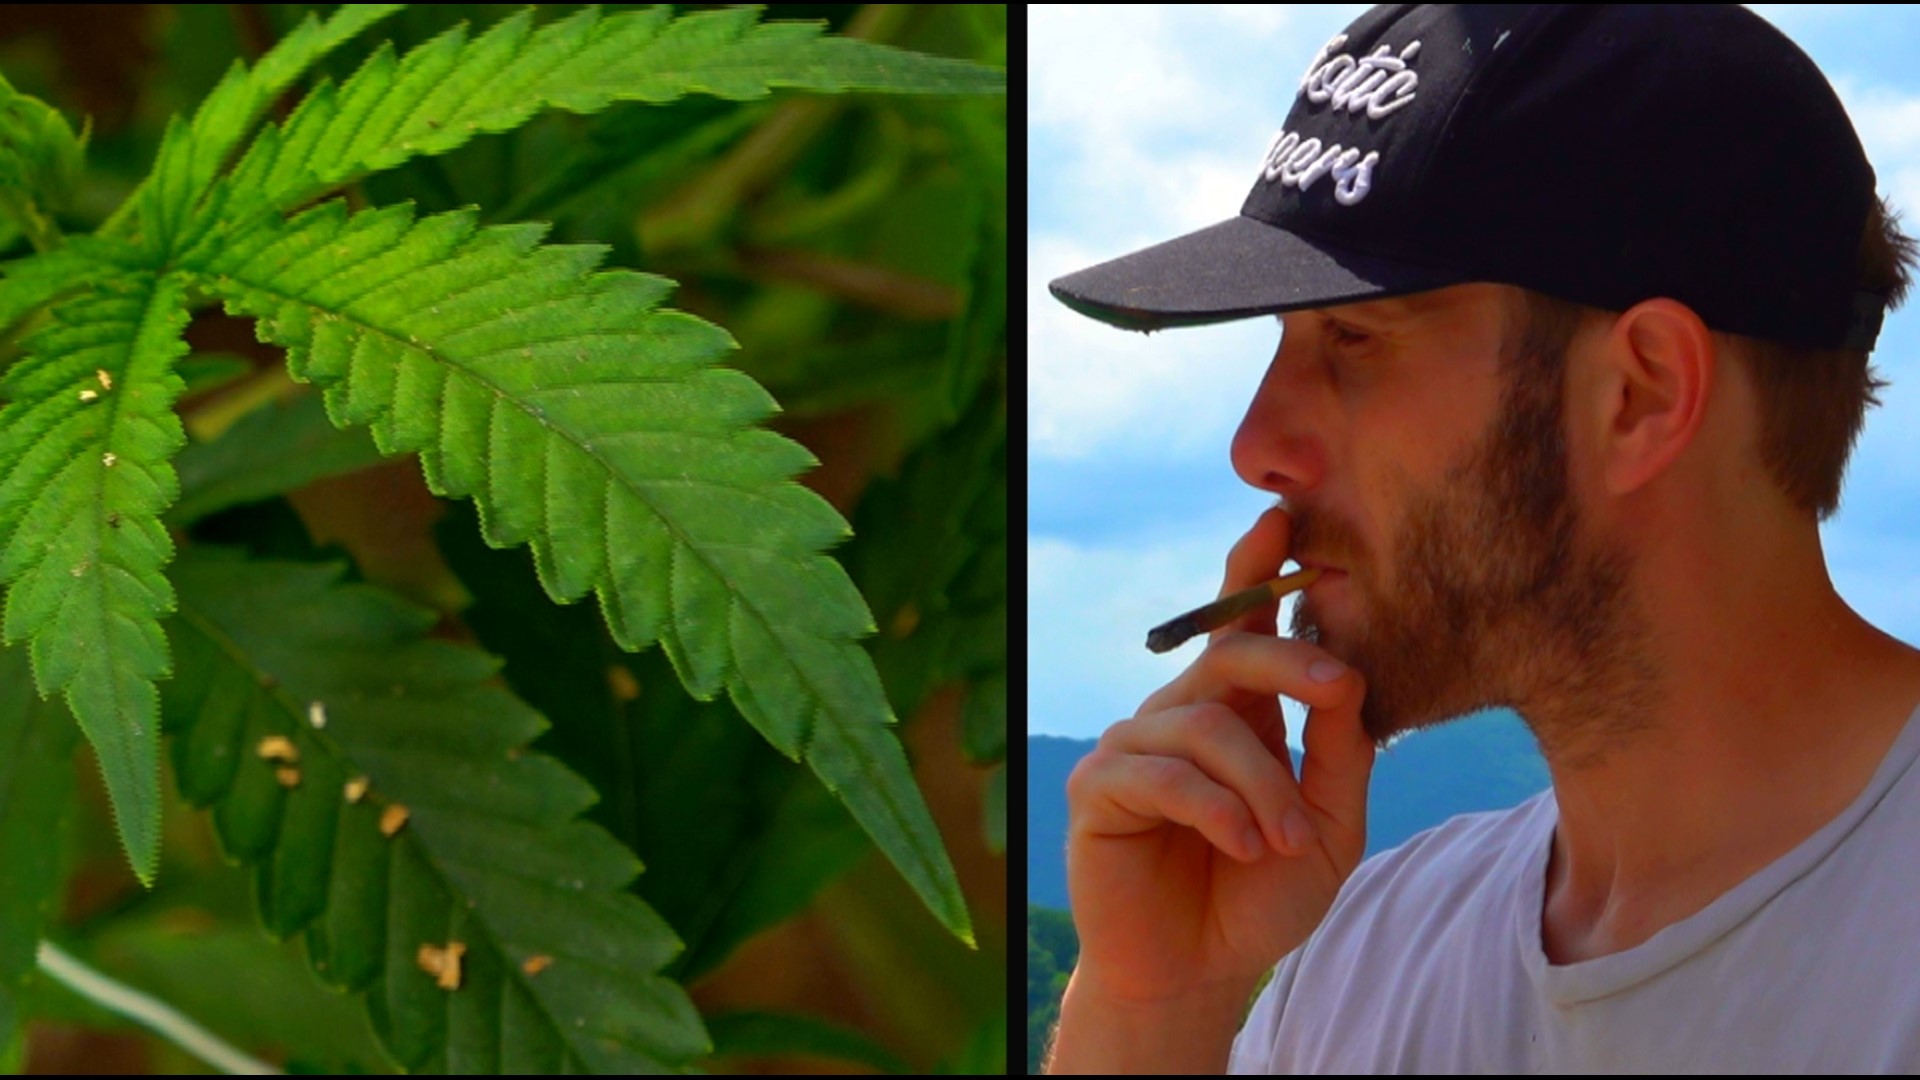 Ryan Rush began growing hemp in a backyard over 6 years ago. Today, he’s running a full-scale operation capitalizing on an unregulated market.